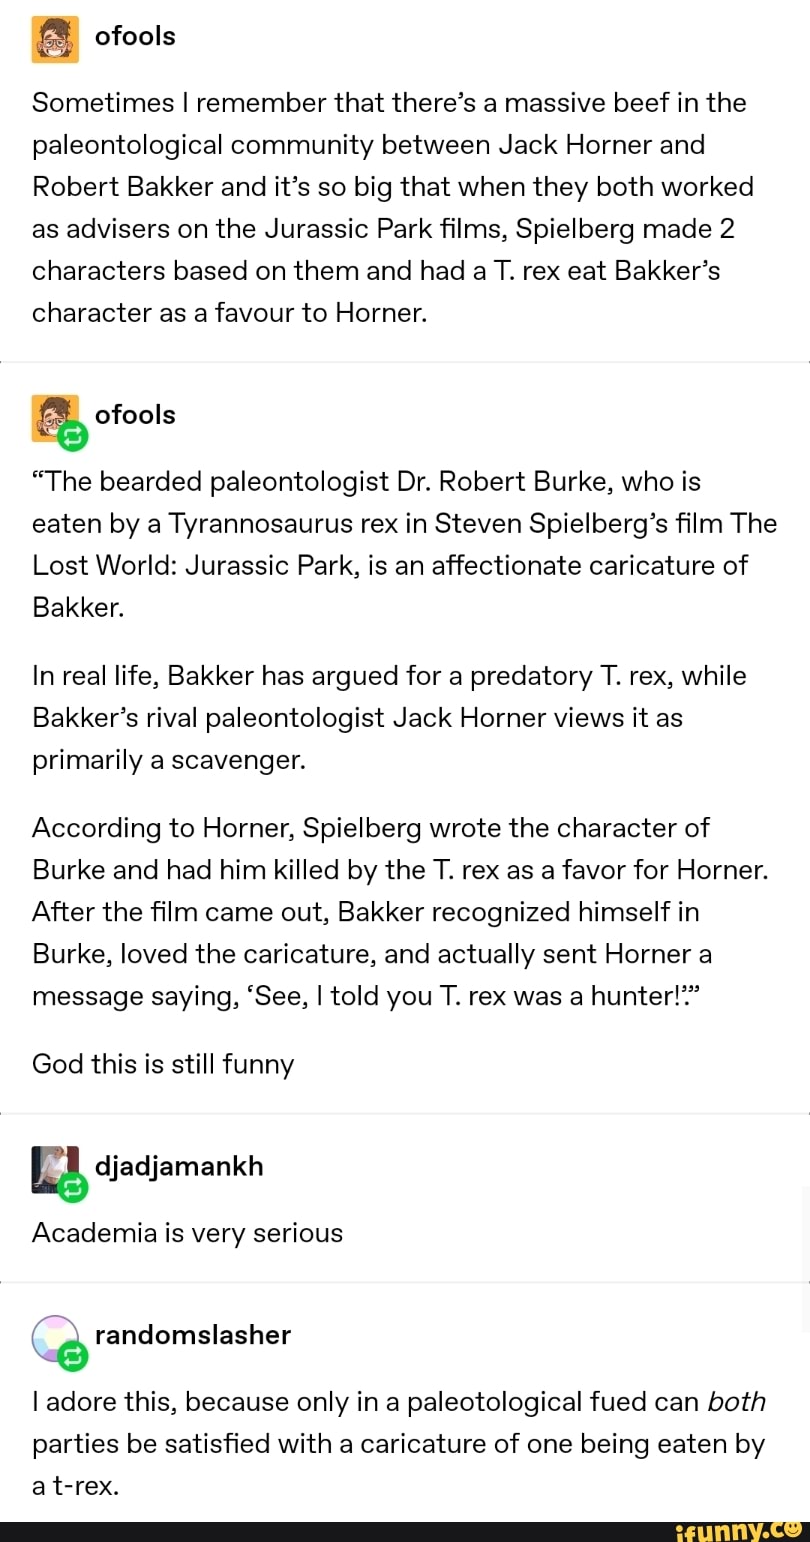 The French Hunter on Tumblr